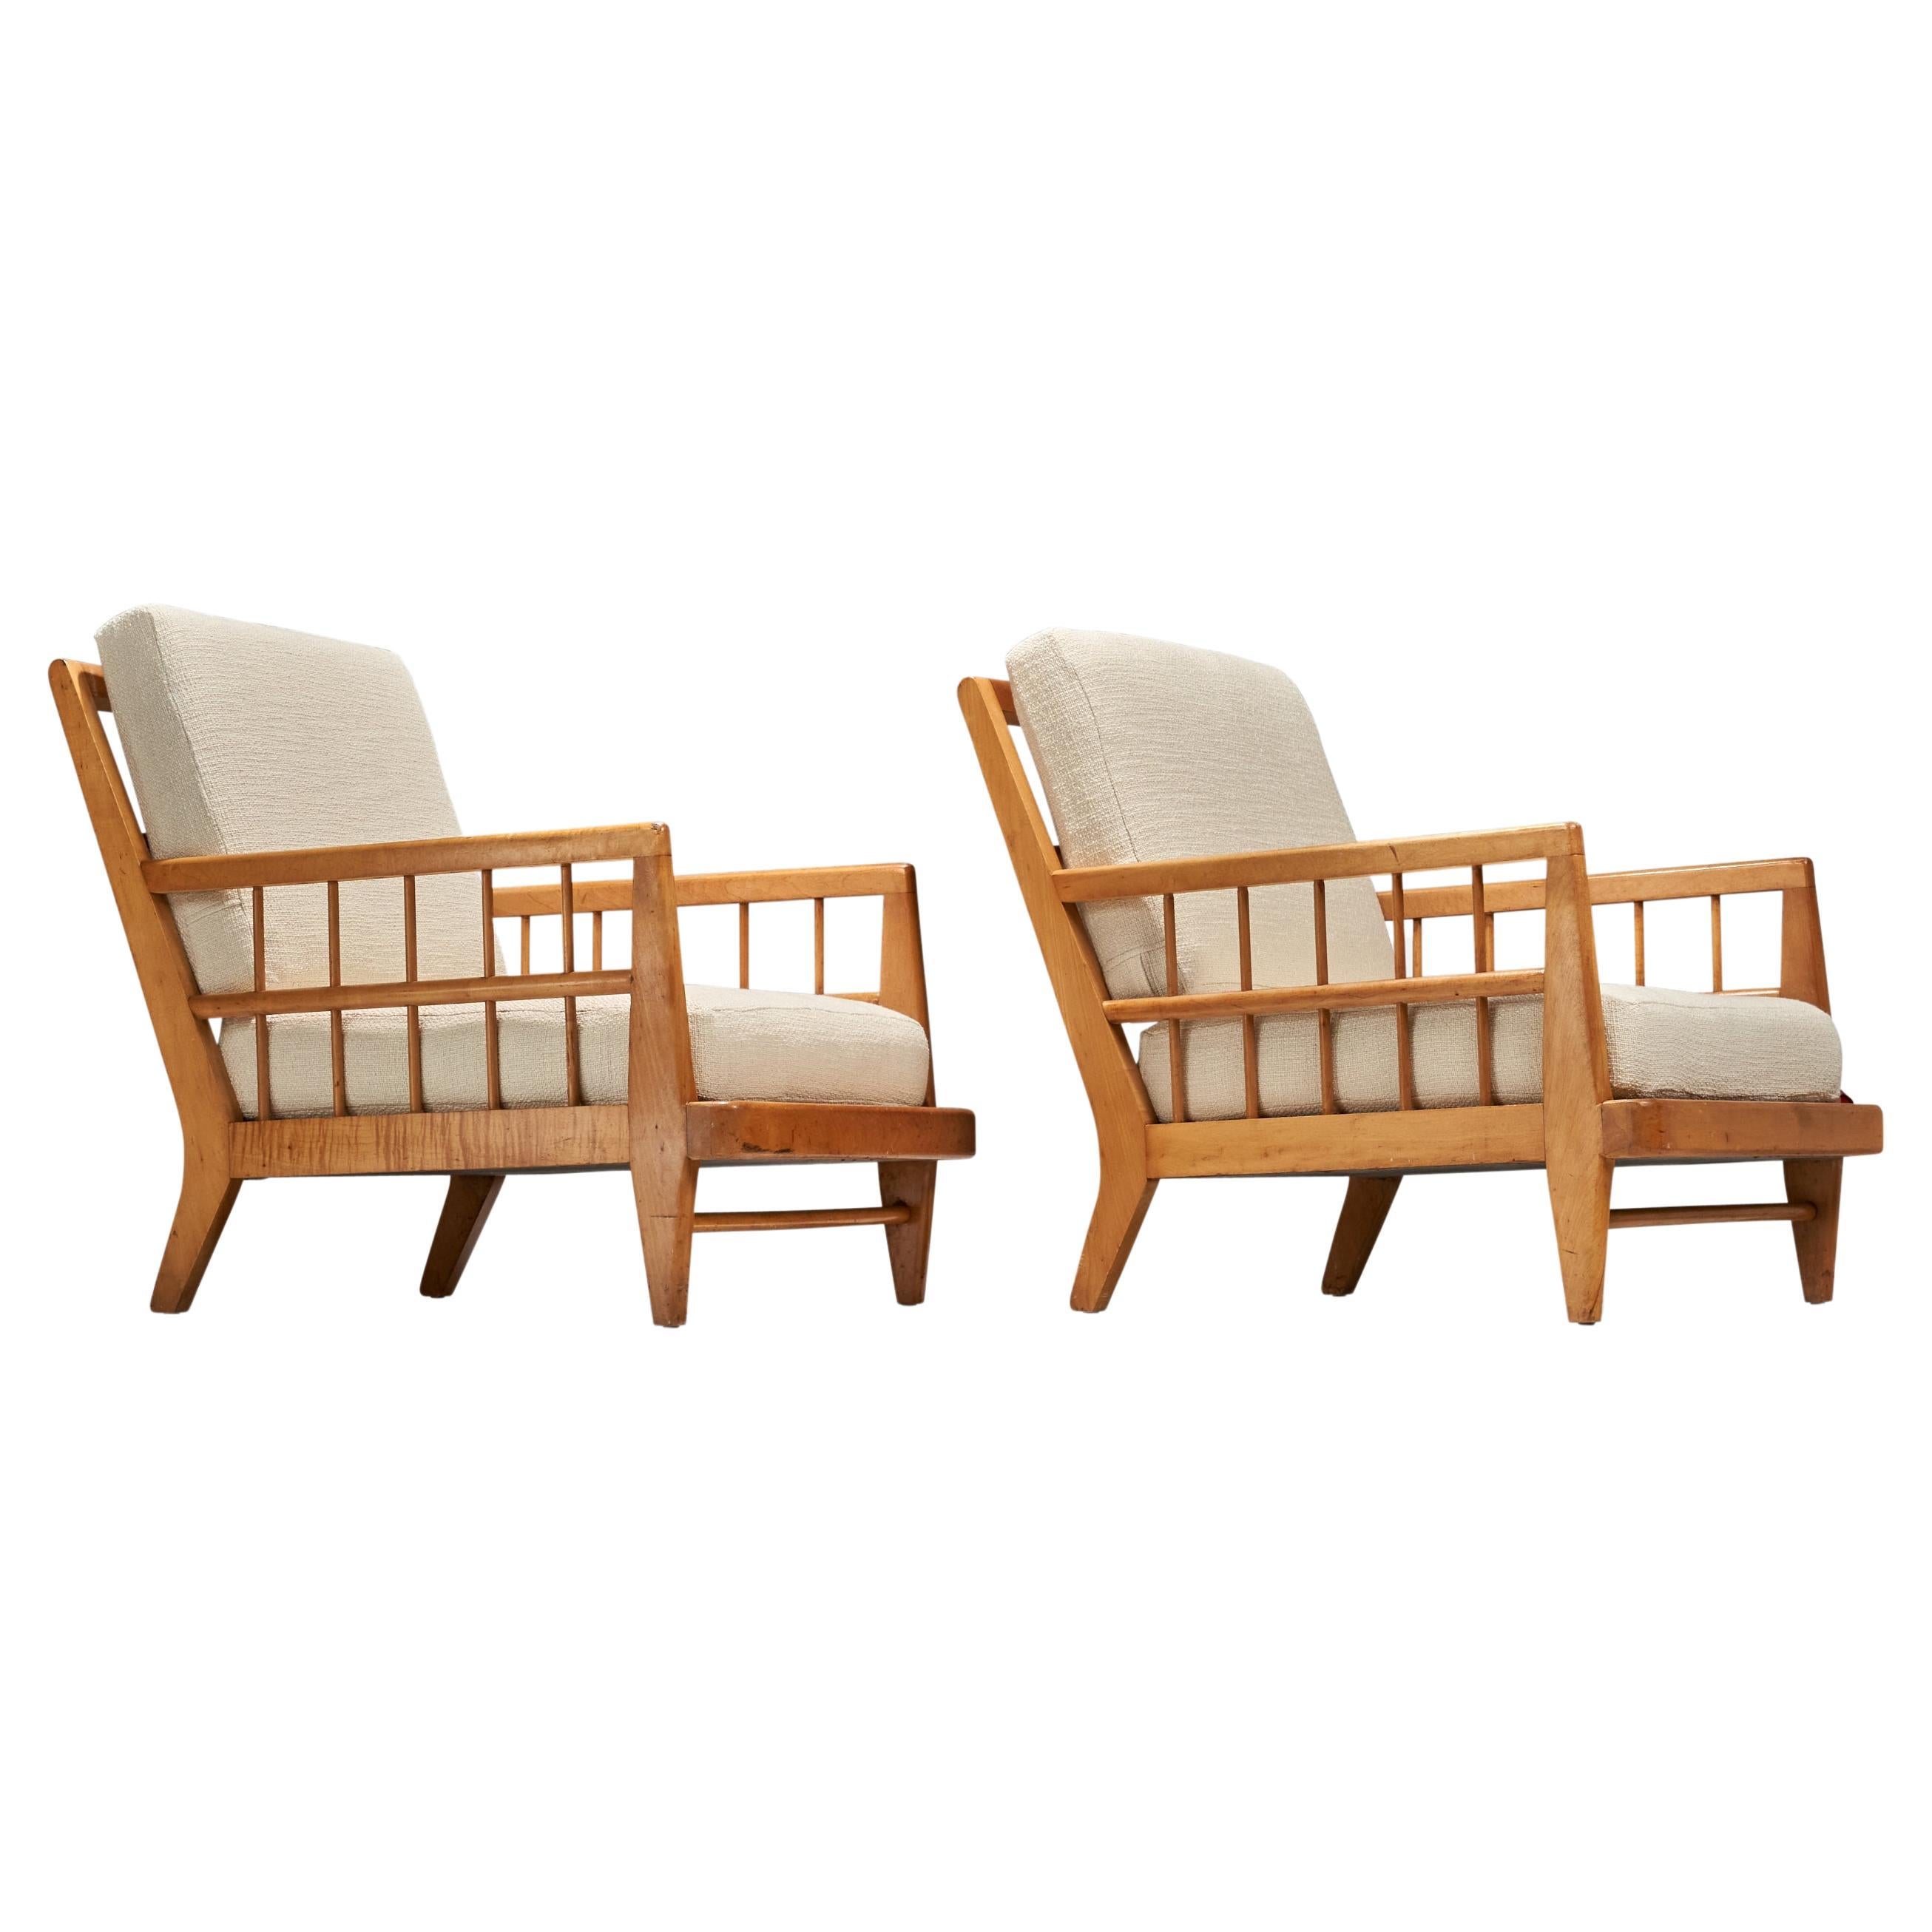 Edward Wormley, Lounge Chairs, Beech, Fabric, Drexel, United States, 1940s For Sale